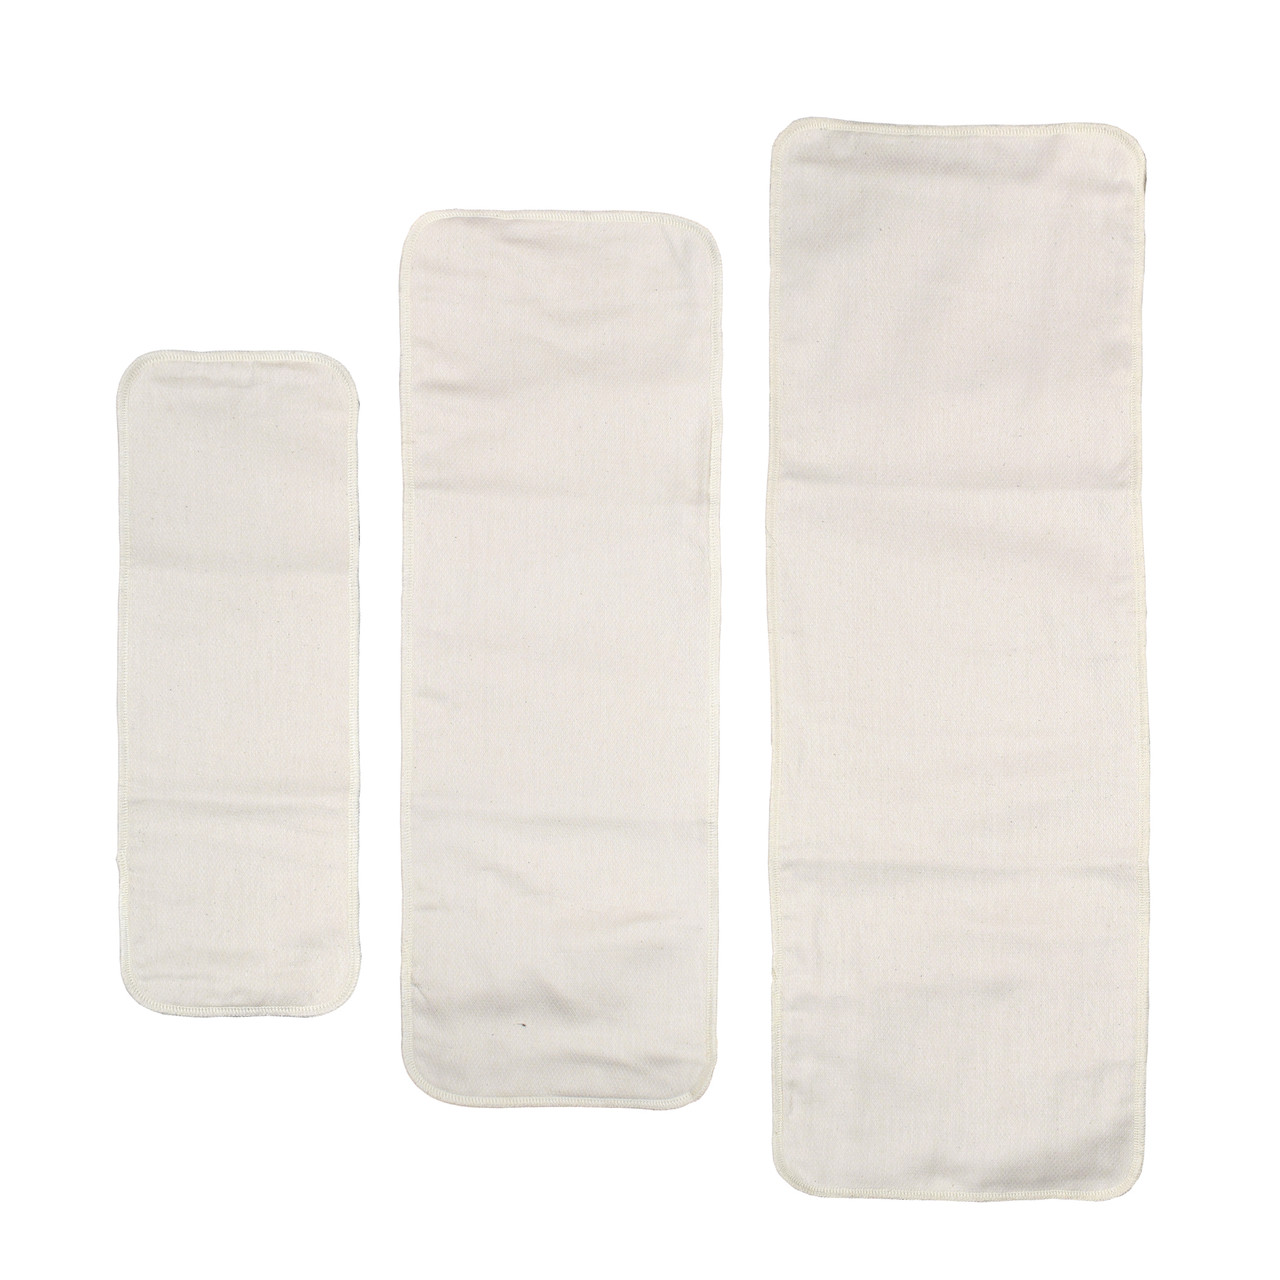 InControl Cloth Diapers & Pads Organic Birdseye Cotton Booster Pad